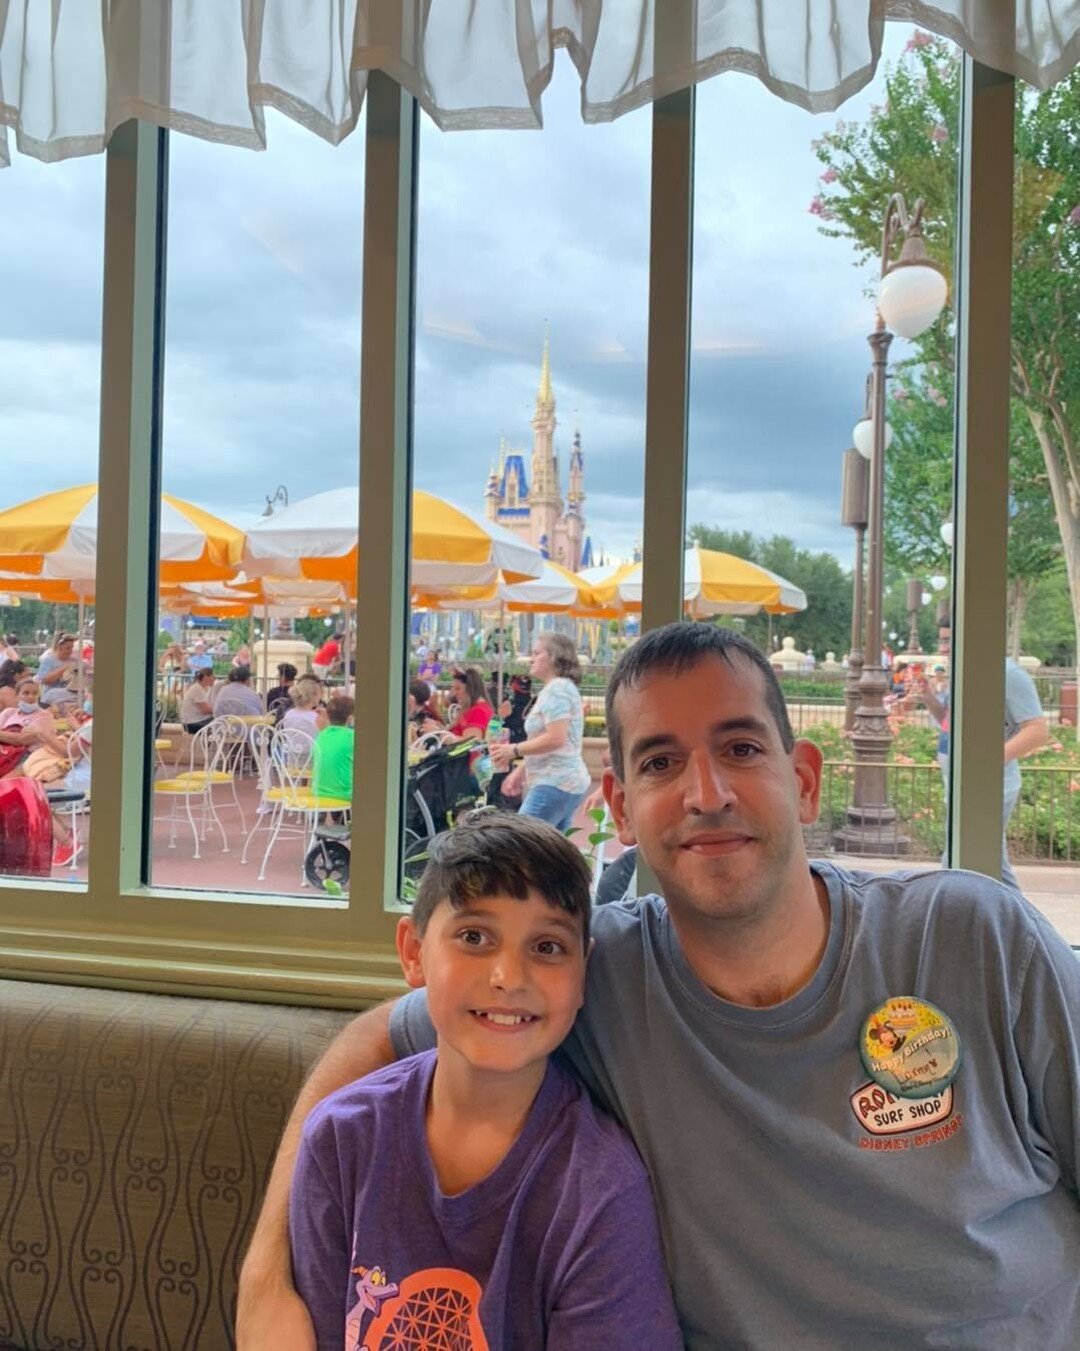 Tonight we&rsquo;re at the Plaza Cafe at Magic Kingdom. Of all the restaurants at Magic Kingdom, this is my favorite. It has a great view of Cinderella Castle too! Try the banana split sundae! 🍨

#saveatwdw #magickingdom #disneyworld